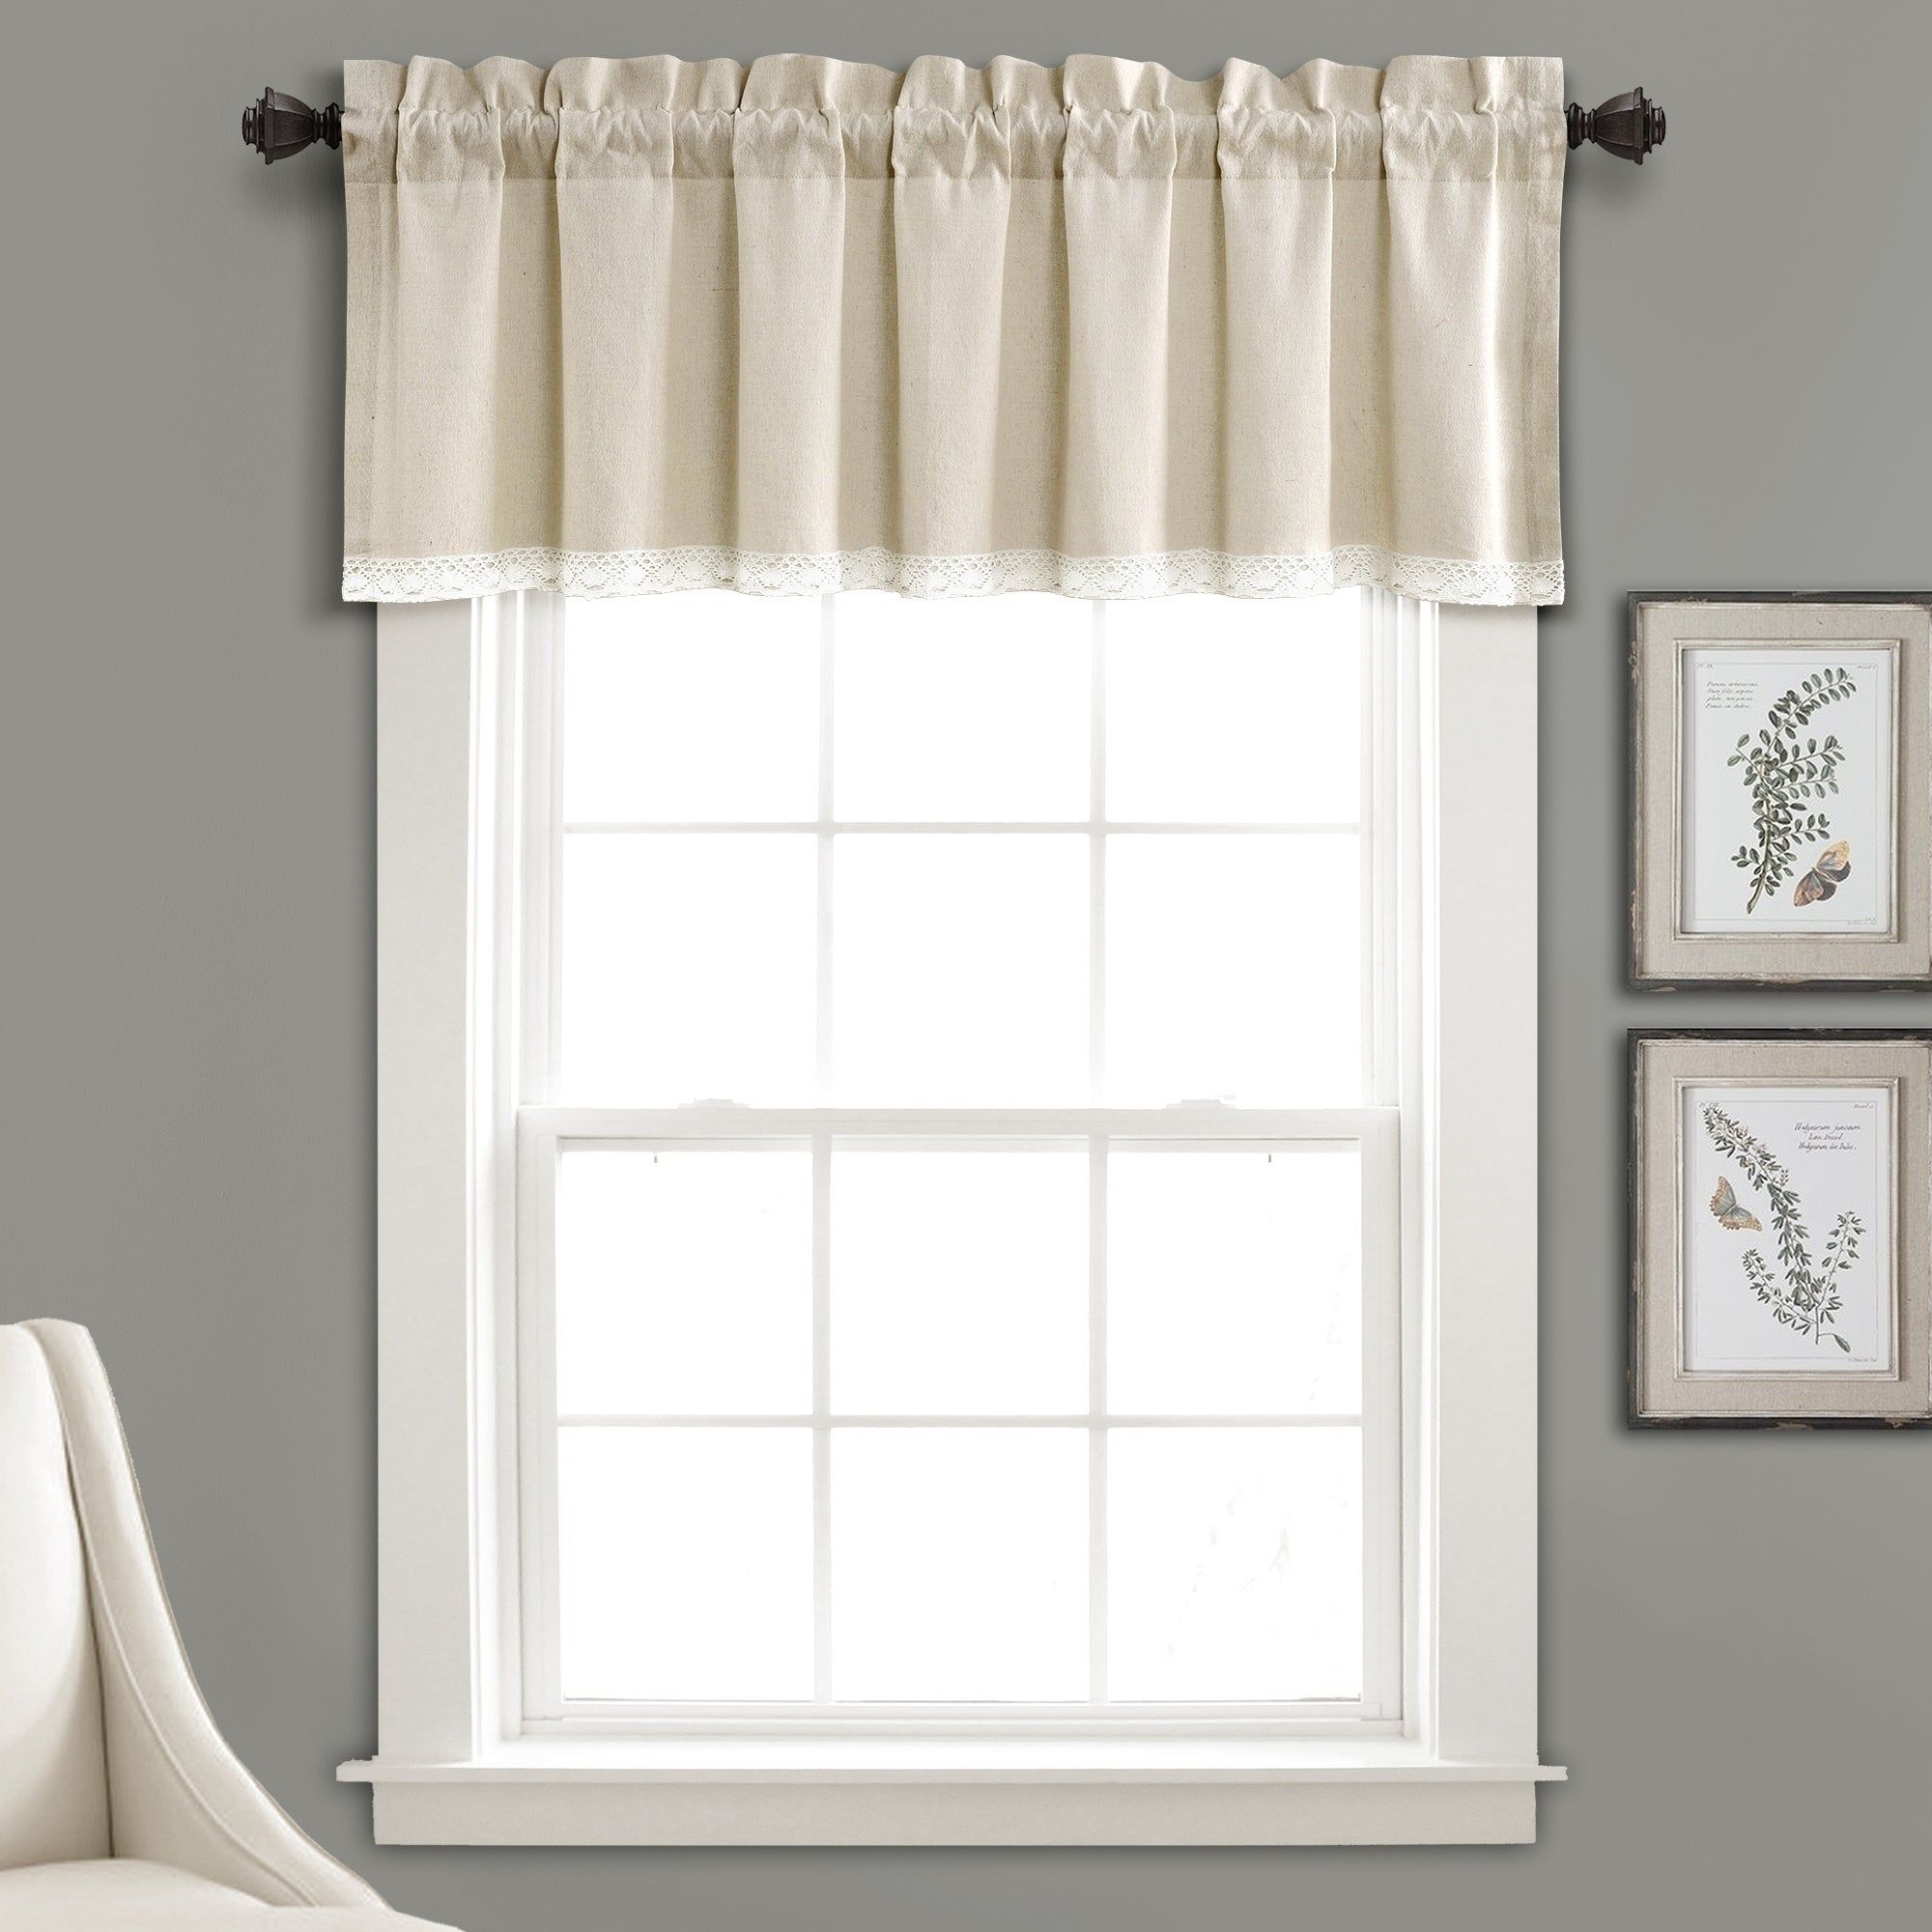 Lush Decor Linen Lace Window Curtain Valance – 52"w X 18"l Within Hudson Pintuck Window Curtain Valances (View 8 of 20)